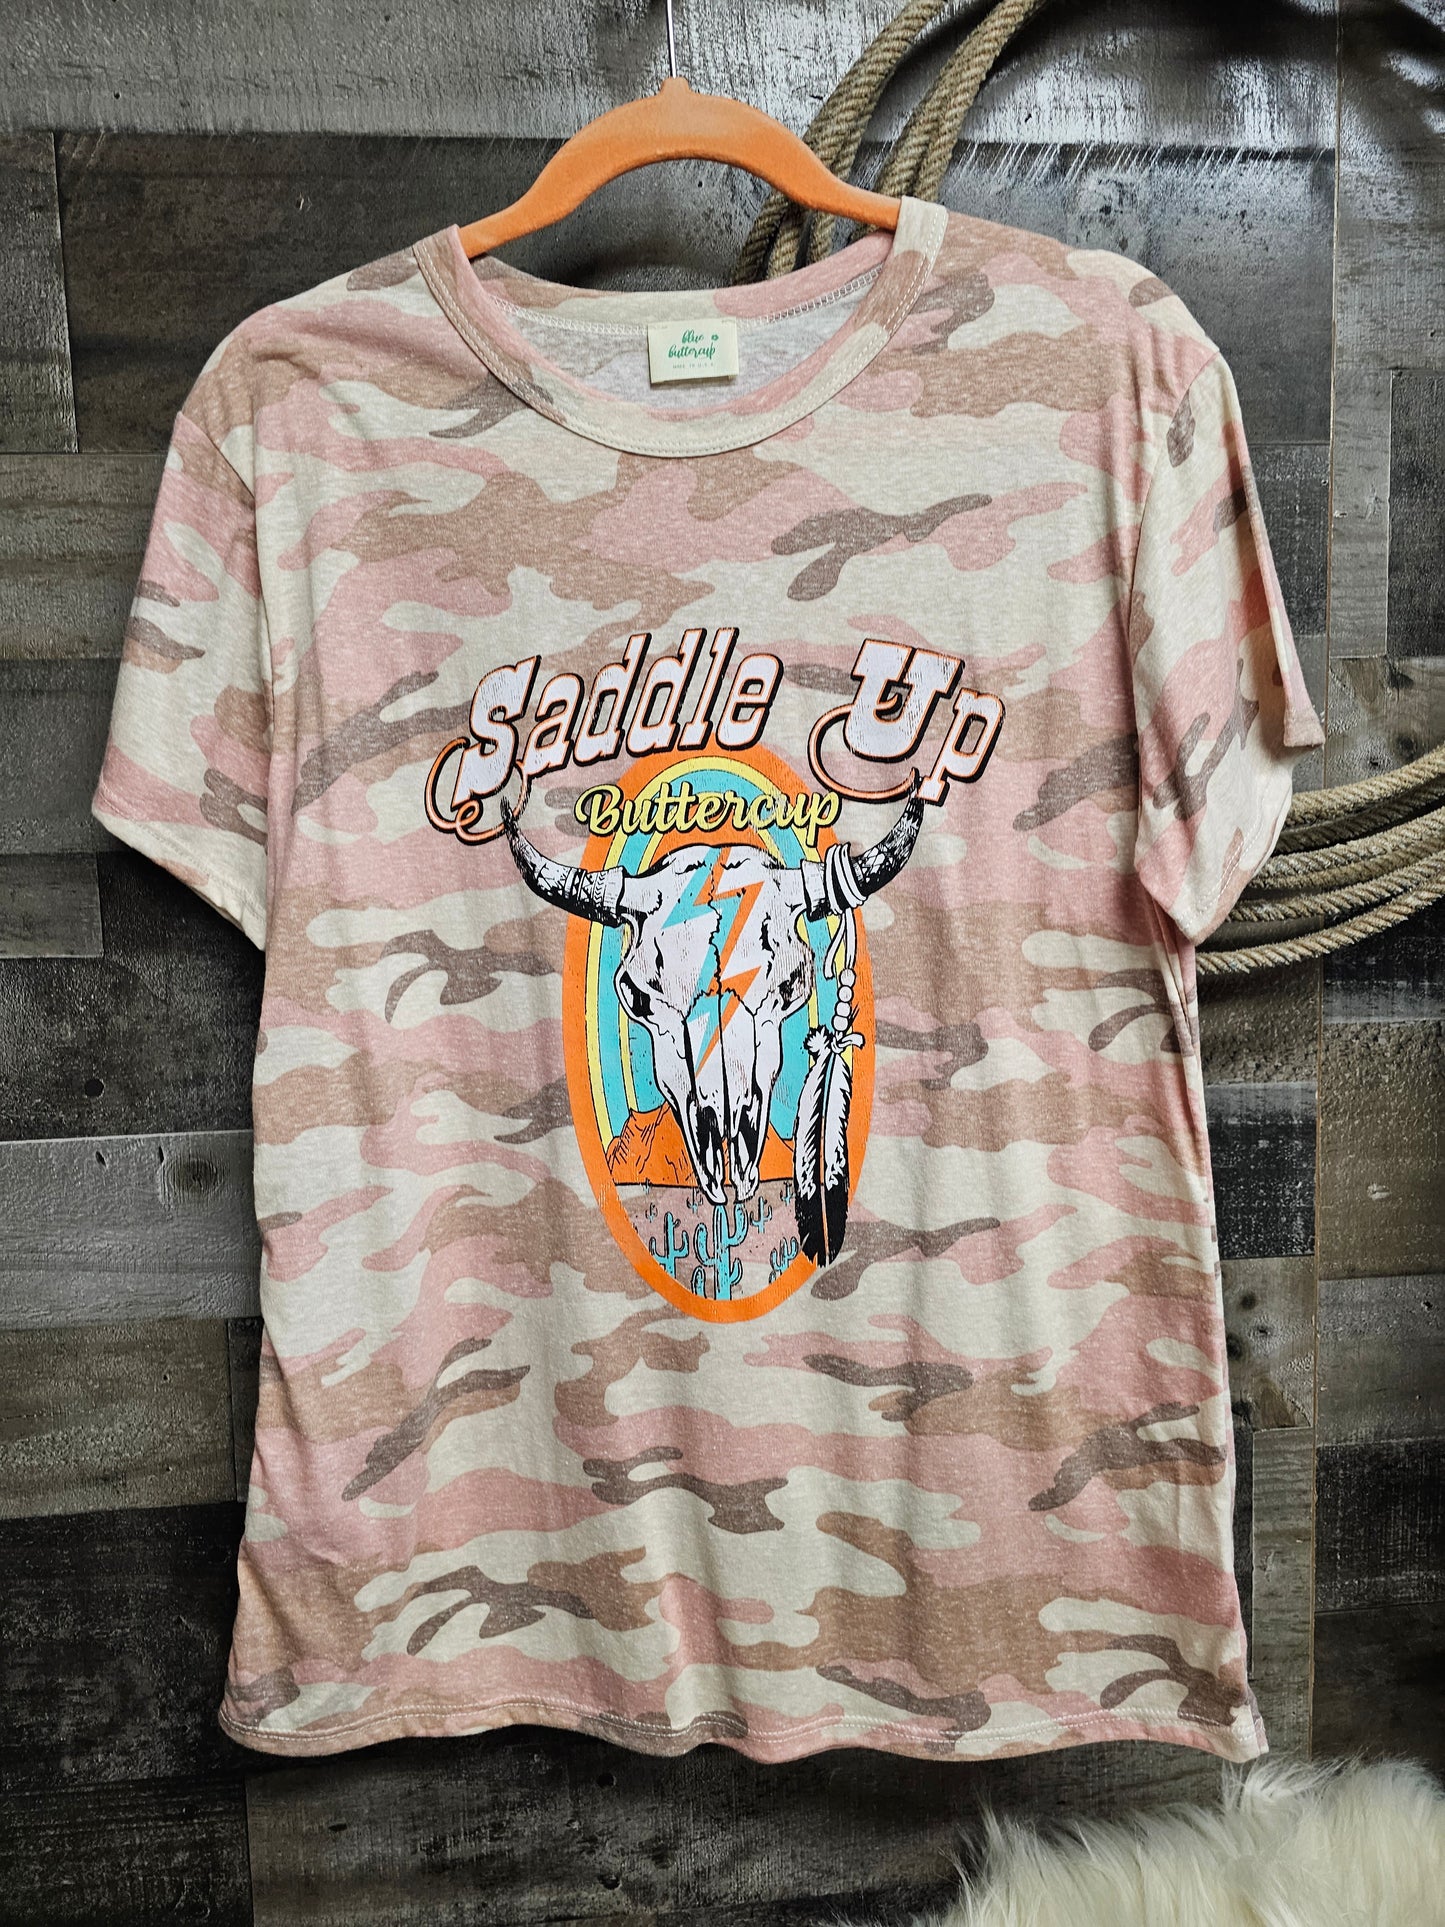 Saddle Up Buttercup Tee size Small